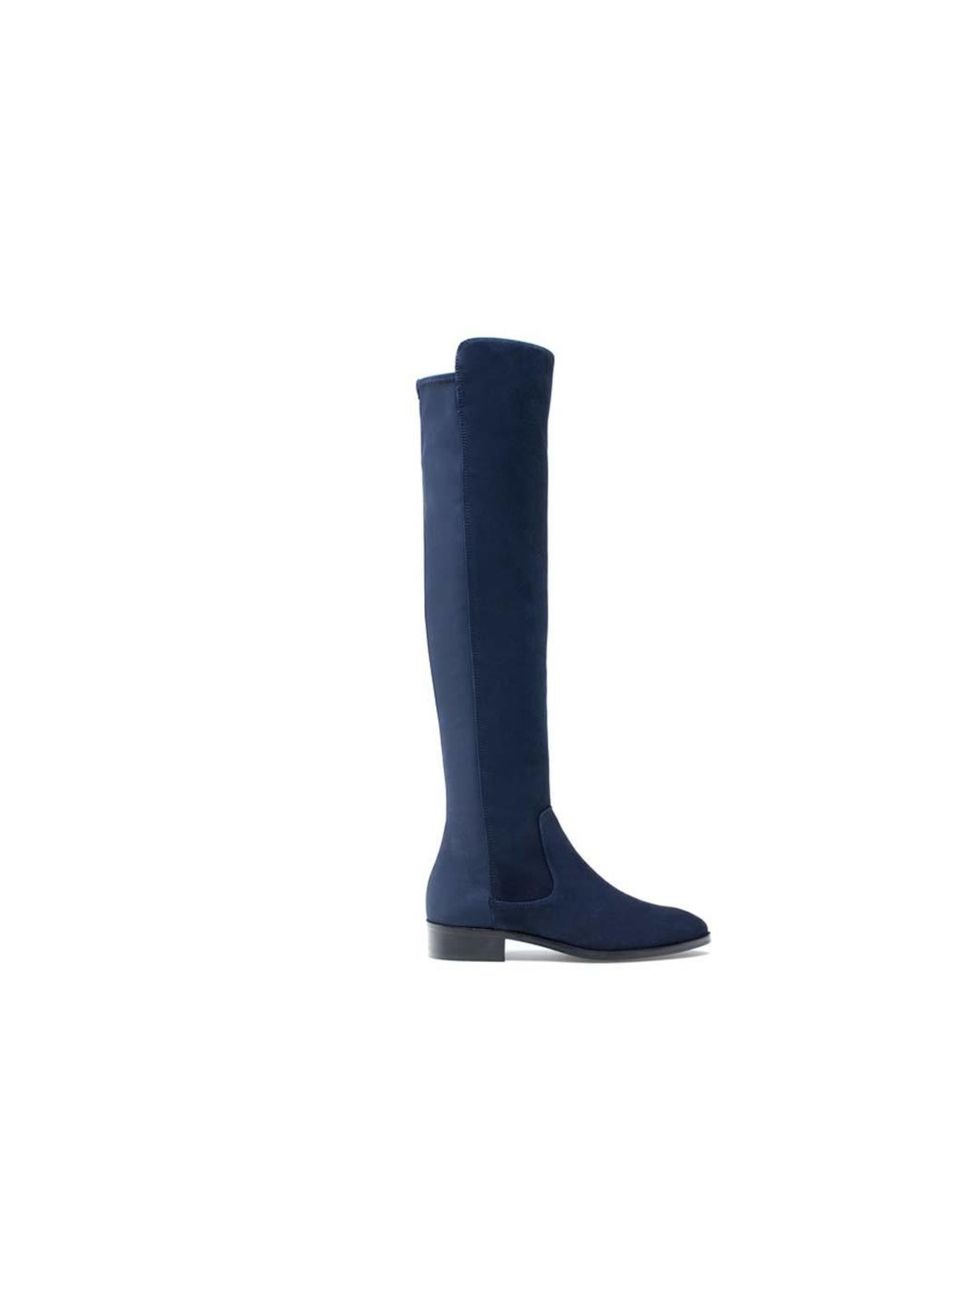 <p>Play with proportions and wear these streamlined navy boots with a boxy t-shirt dress, like Production & Bookings Assistant Melanie de la Cruz.</p><p><a href="http://www.uterque.com/webapp/wcs/stores/servlet/product/uterquegb/en/70109652/48002/3014502/